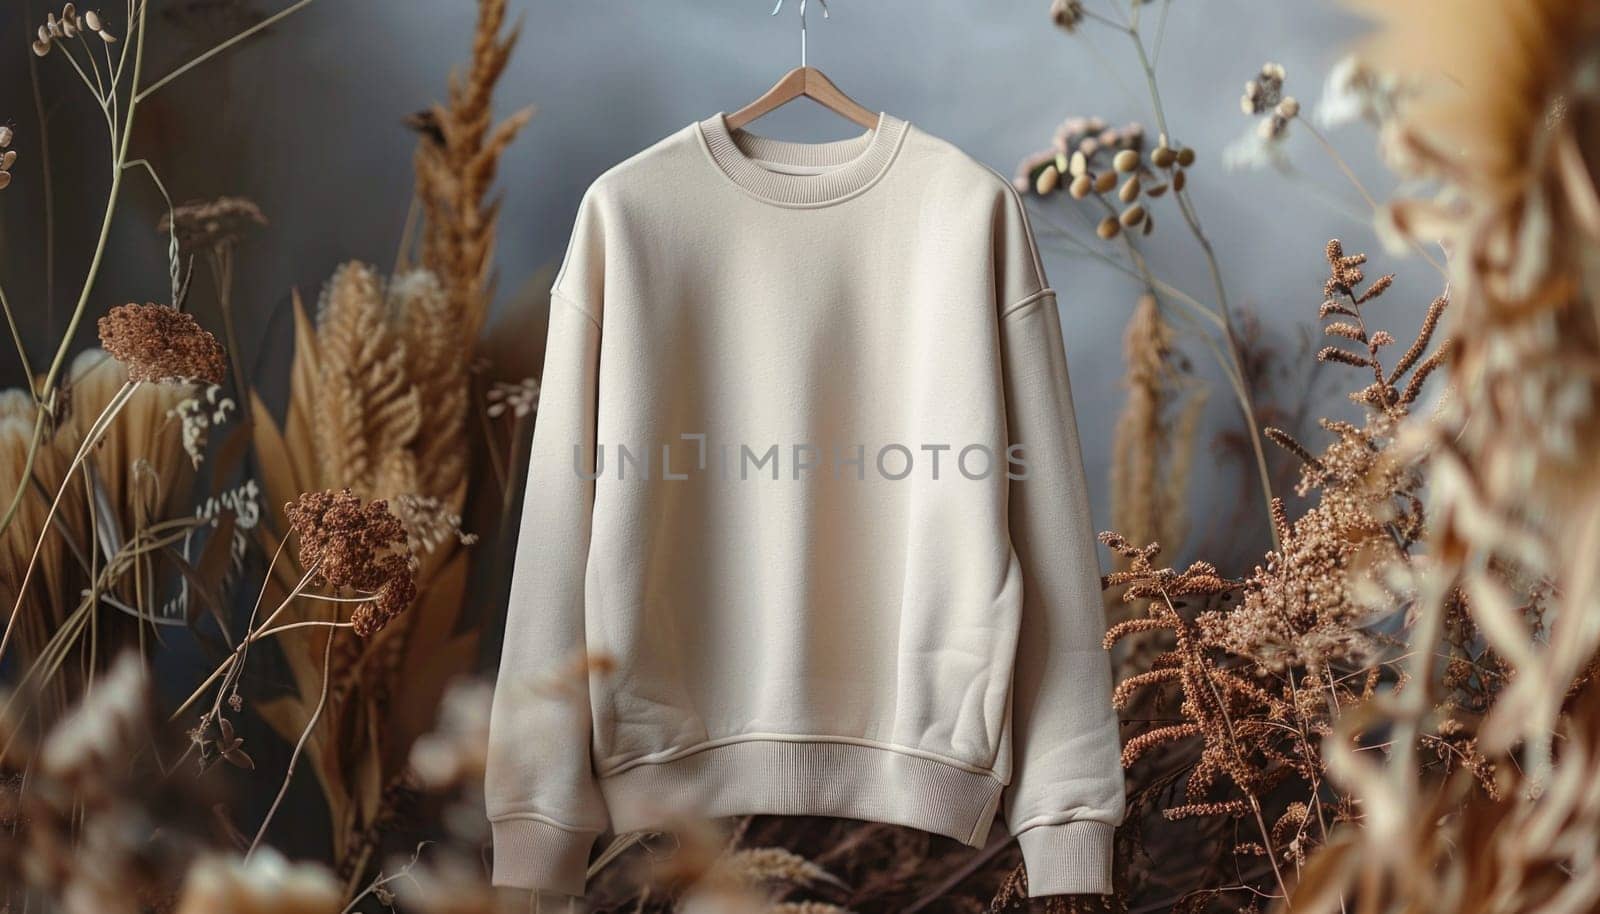 A beautiful white sweatshirt adorned with dried flowers is displayed on a hanger, highlighting its unique design